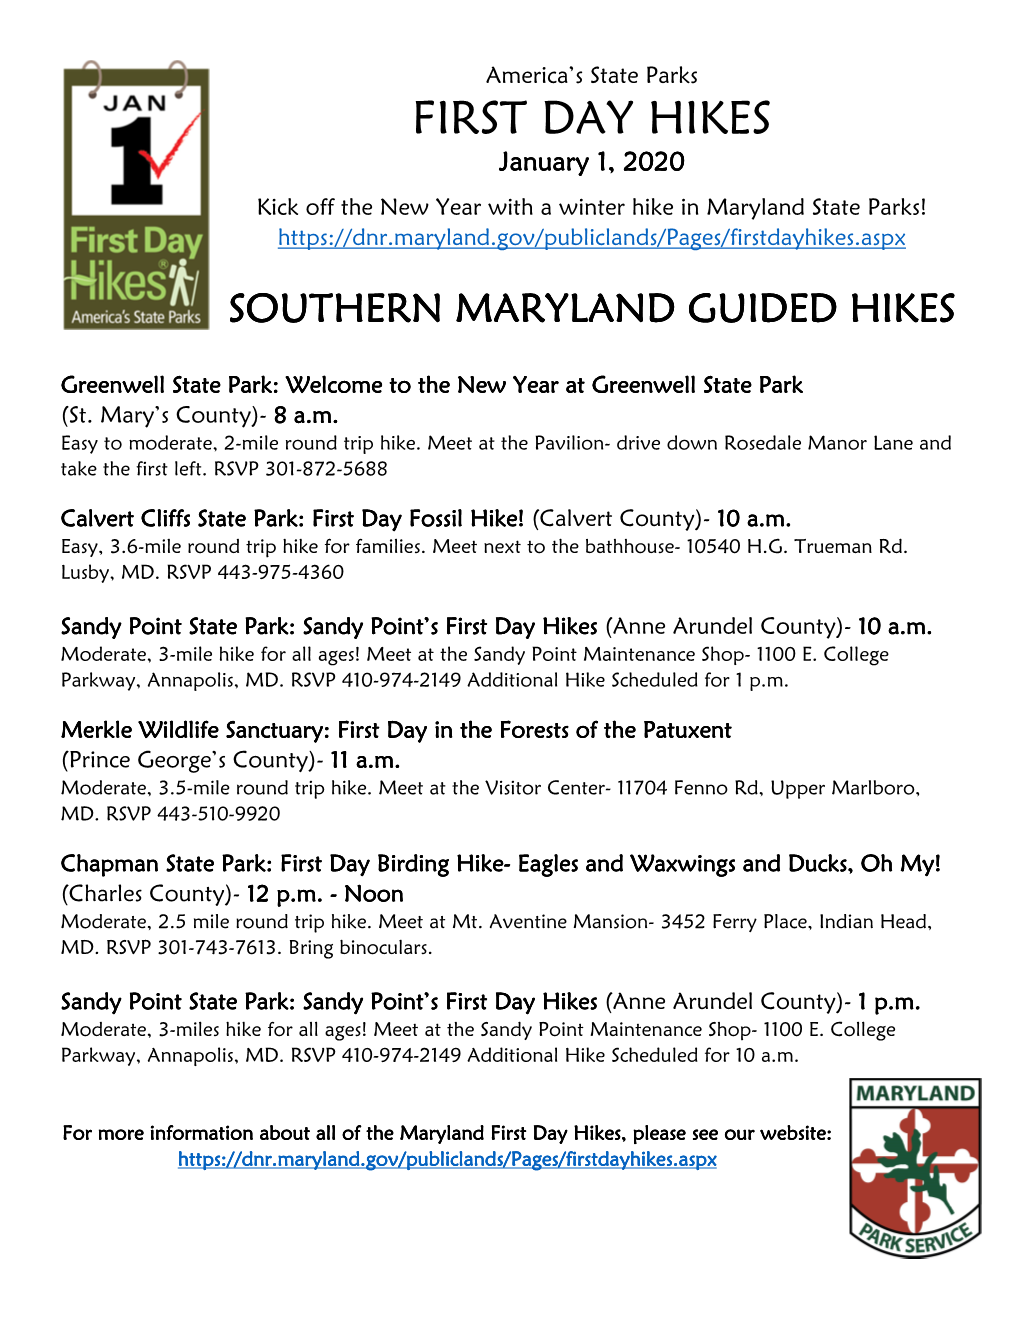 FIRST DAY HIKES January 1, 2020 Kick Off the New Year with a Winter Hike in Maryland State Parks!